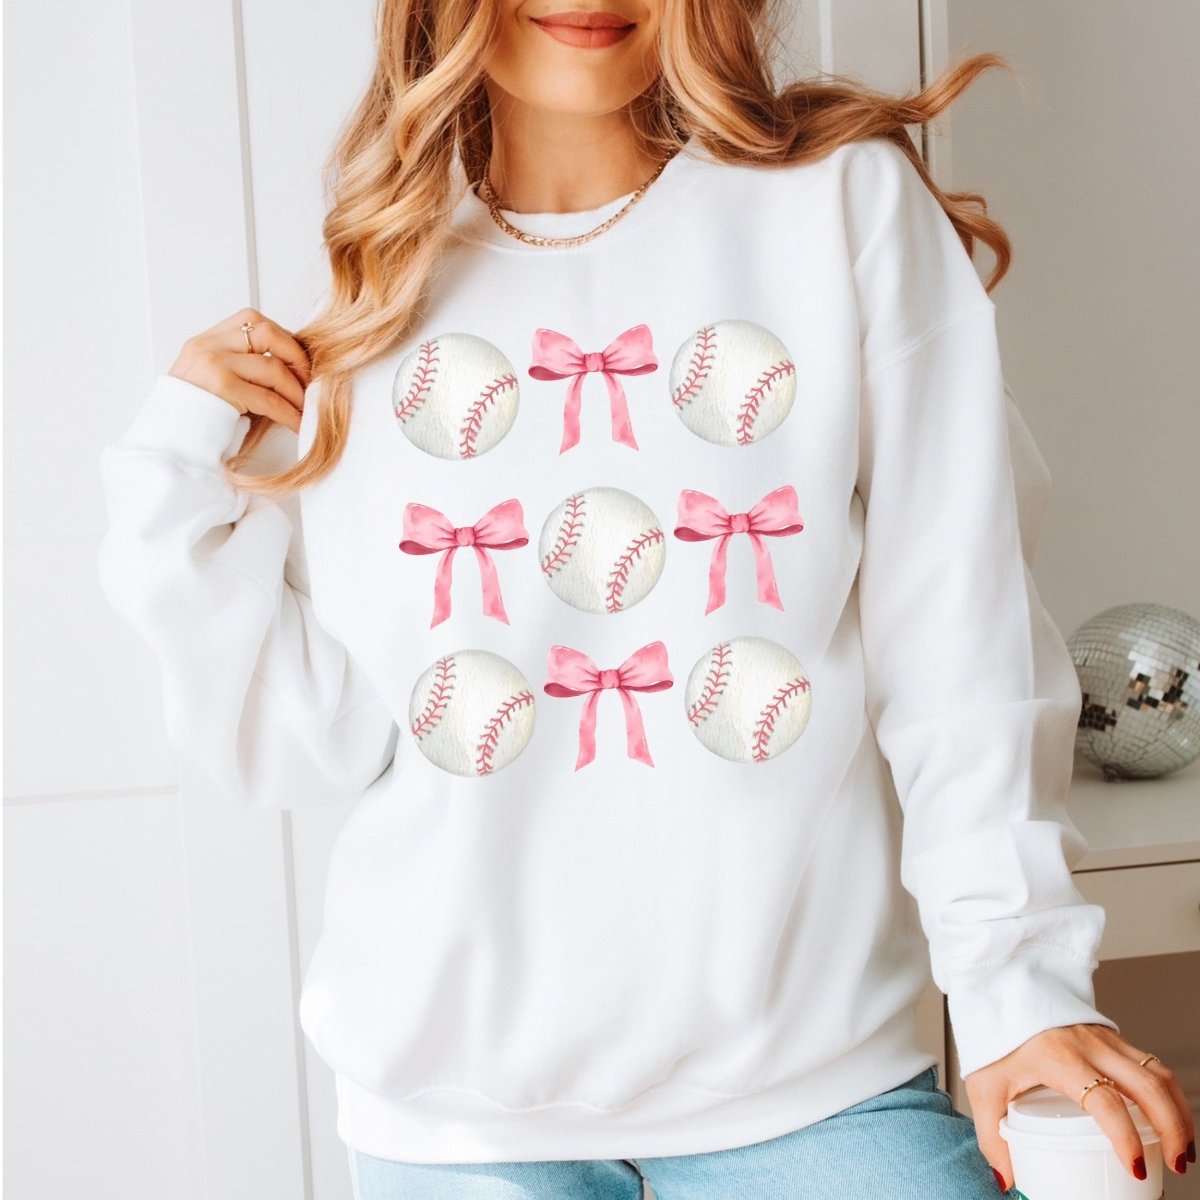 Baseballs And Bows Collage Sweatshirt - Hot Item - Limeberry Designs